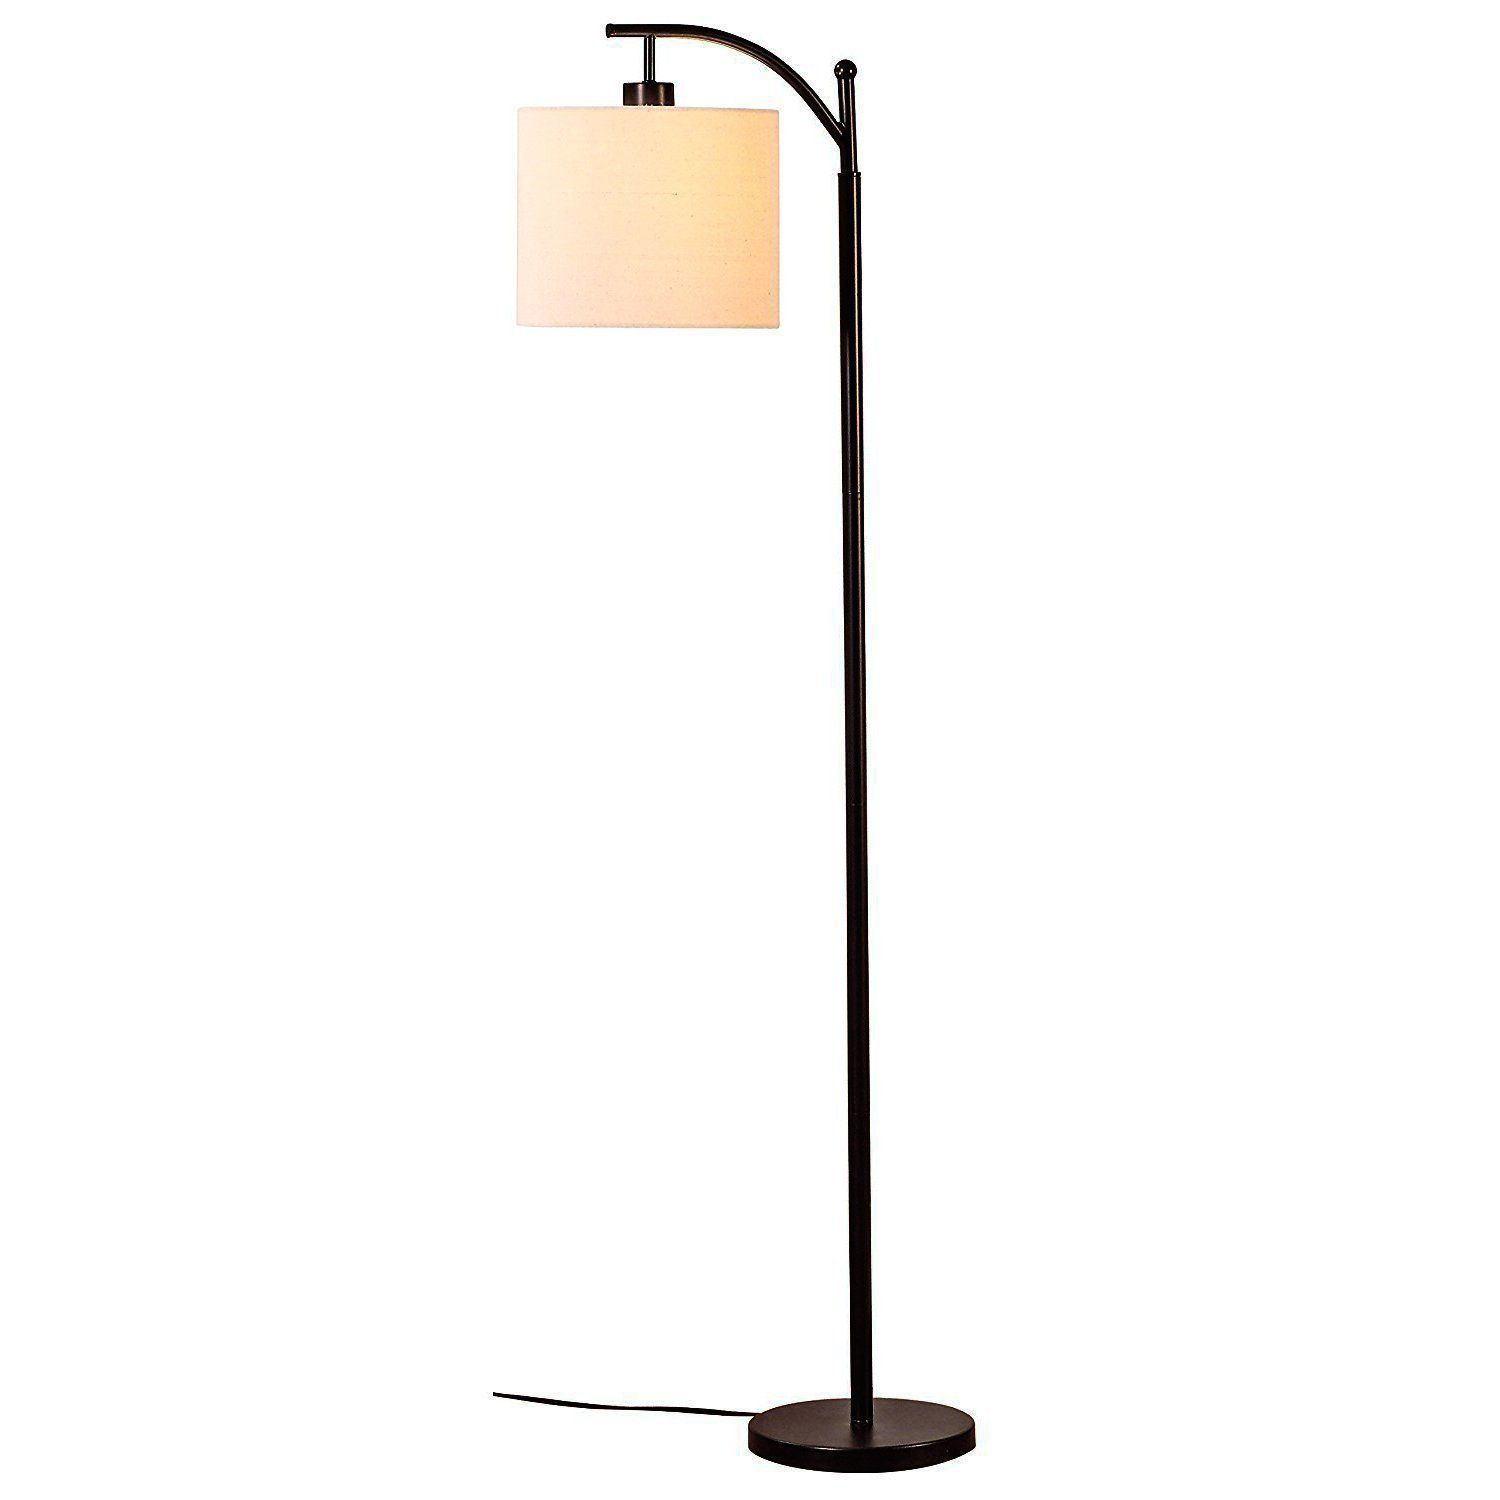 Swag Lamp Chain Hanging Lamp Ideas Cool Floor Lamps Led with regard to size 1500 X 1500